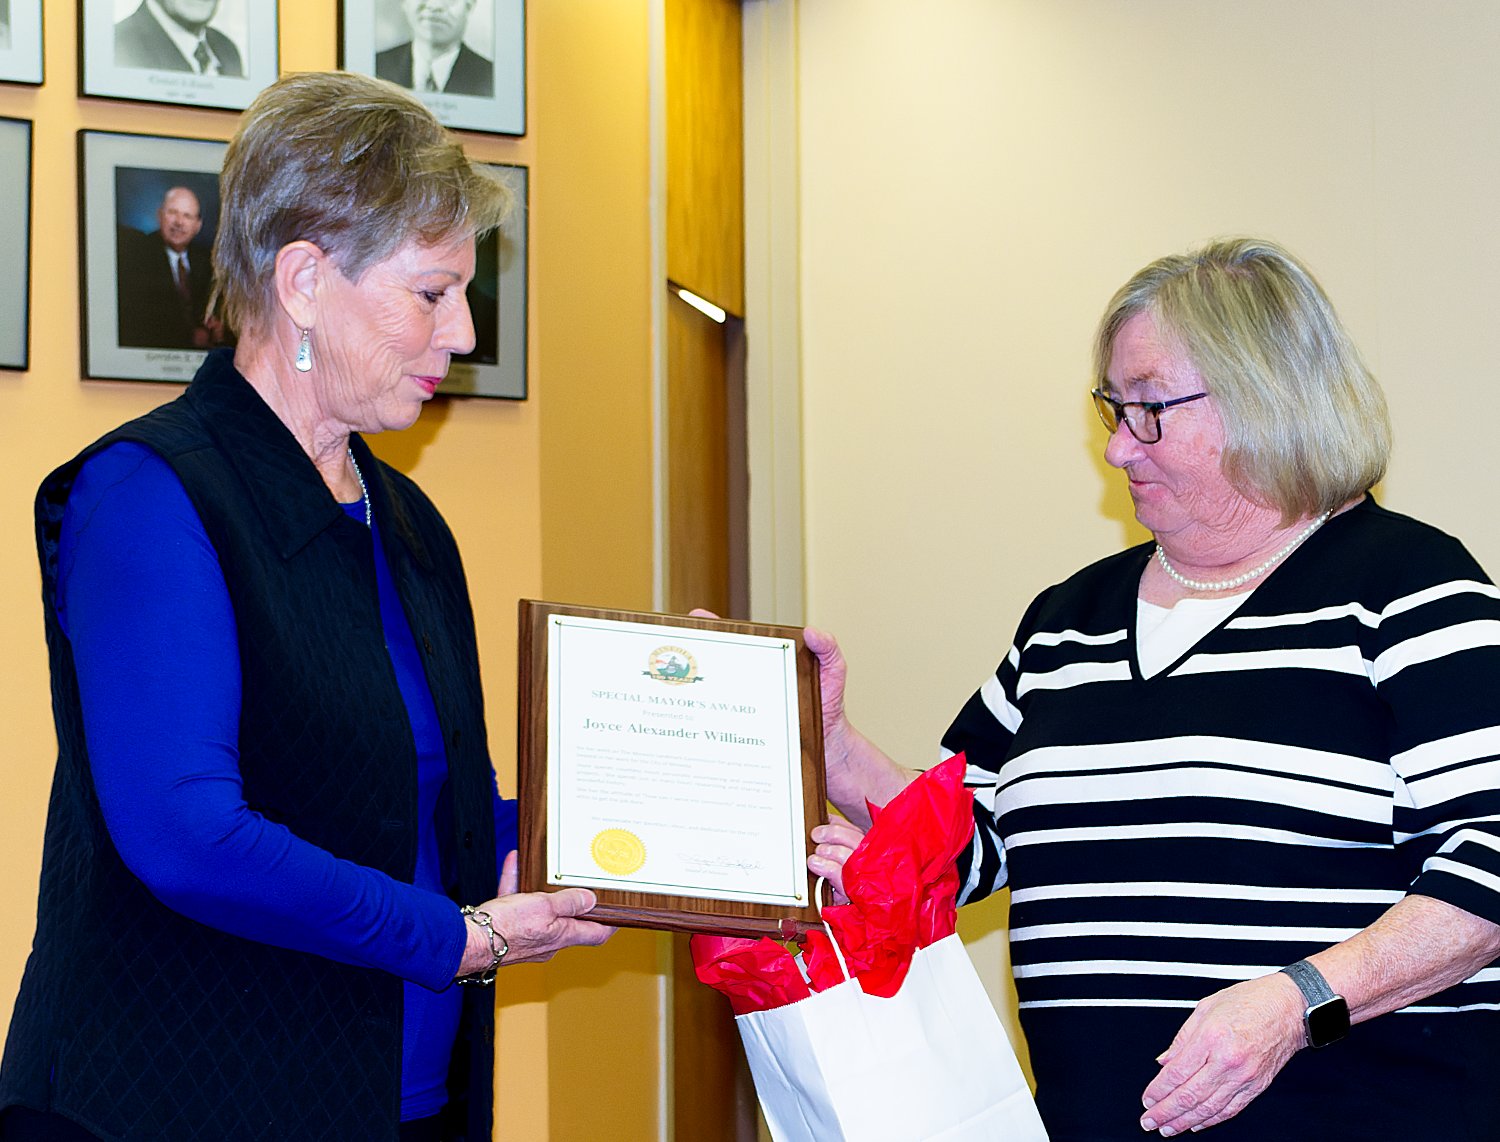 Mineola Mayor Jayne Lankford, right, presented a special award Monday to Joyce Williams for the retired teacher’s volunteer efforts throughout the city, especially concerning historic Mineola and the Iron Horse Square Park.